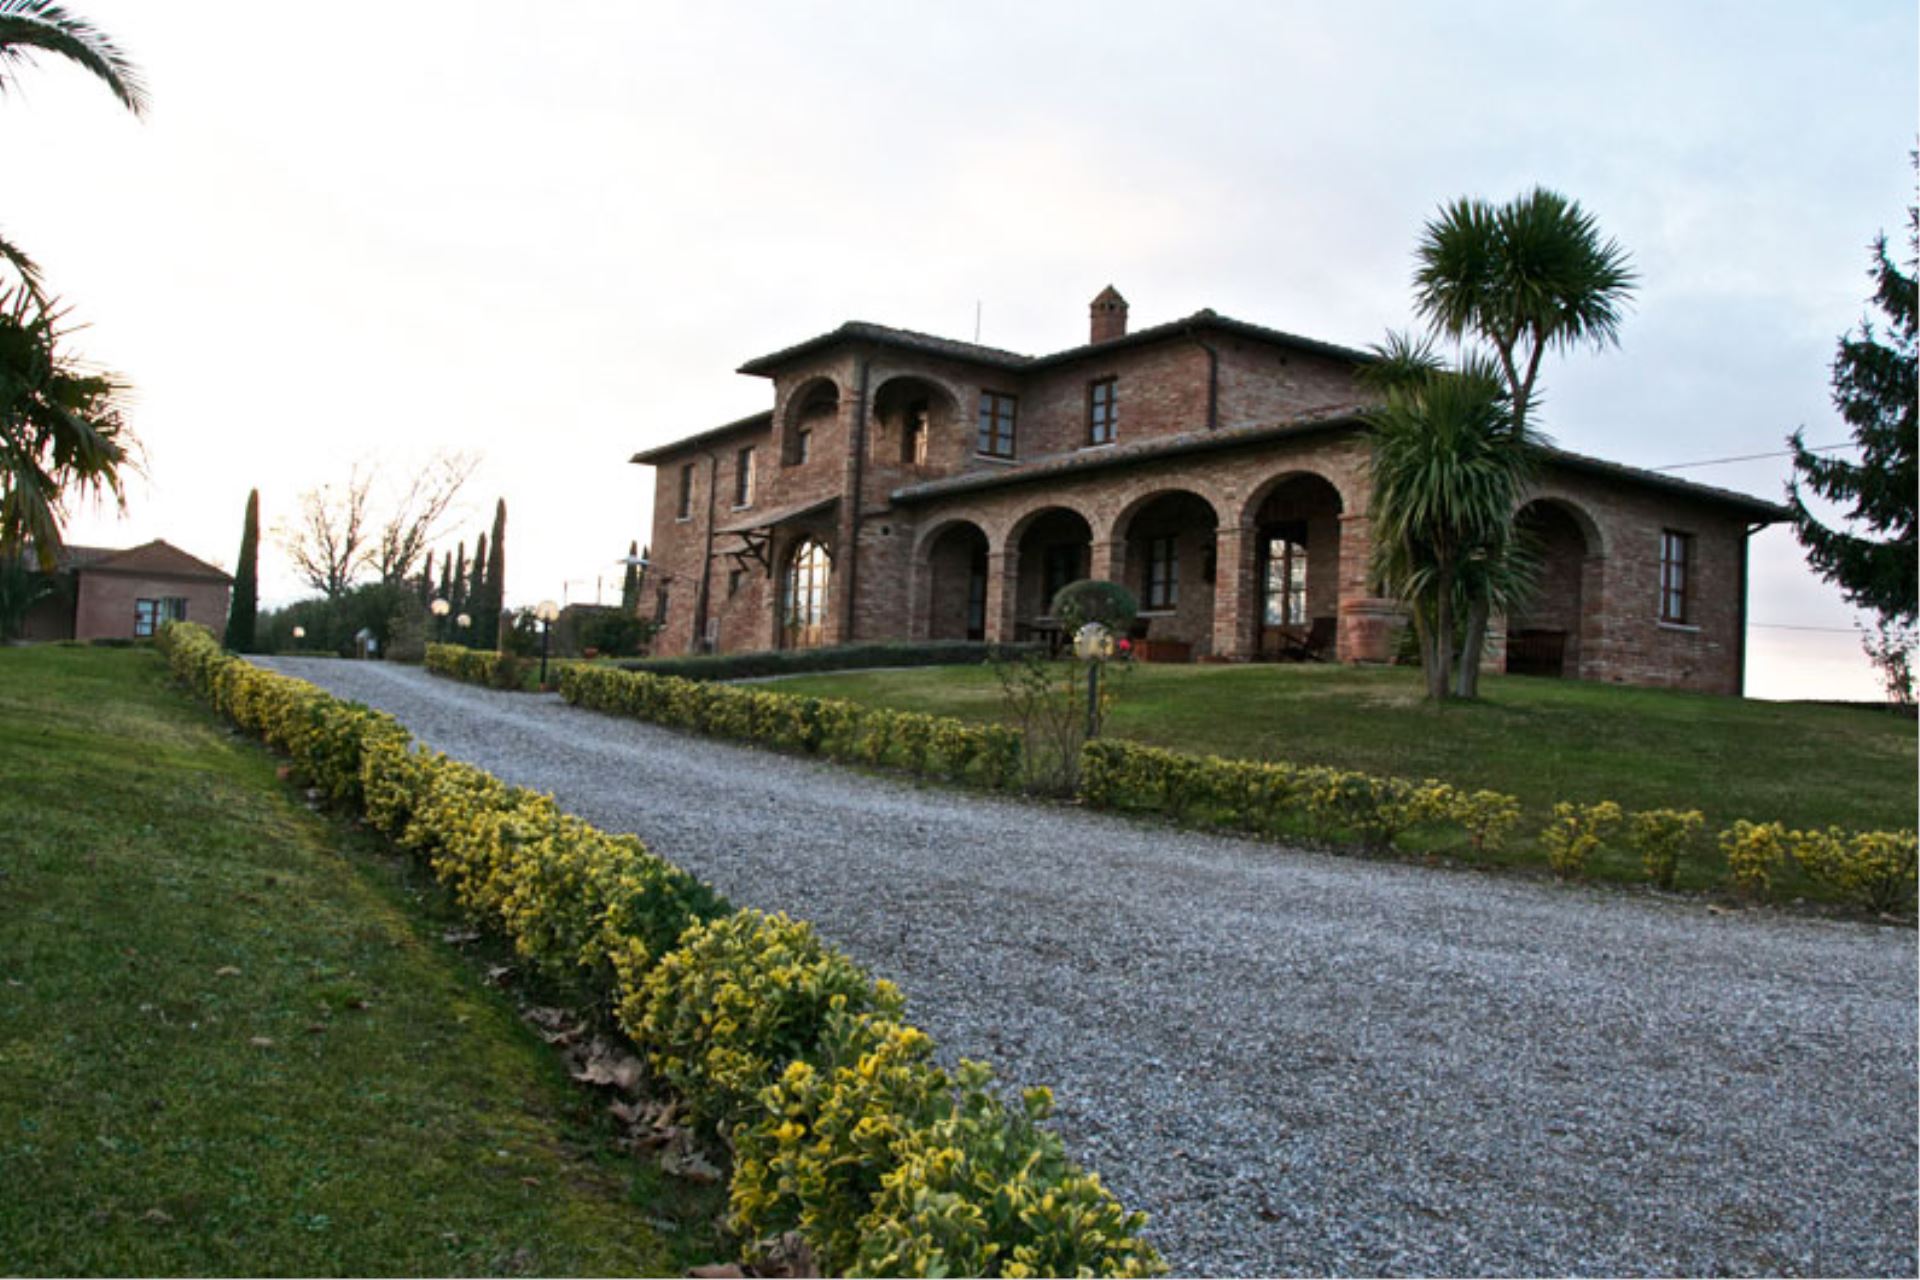 APARTMENTS WITH POOL CIPRESSO MONTEPULCIANO TOSCANA